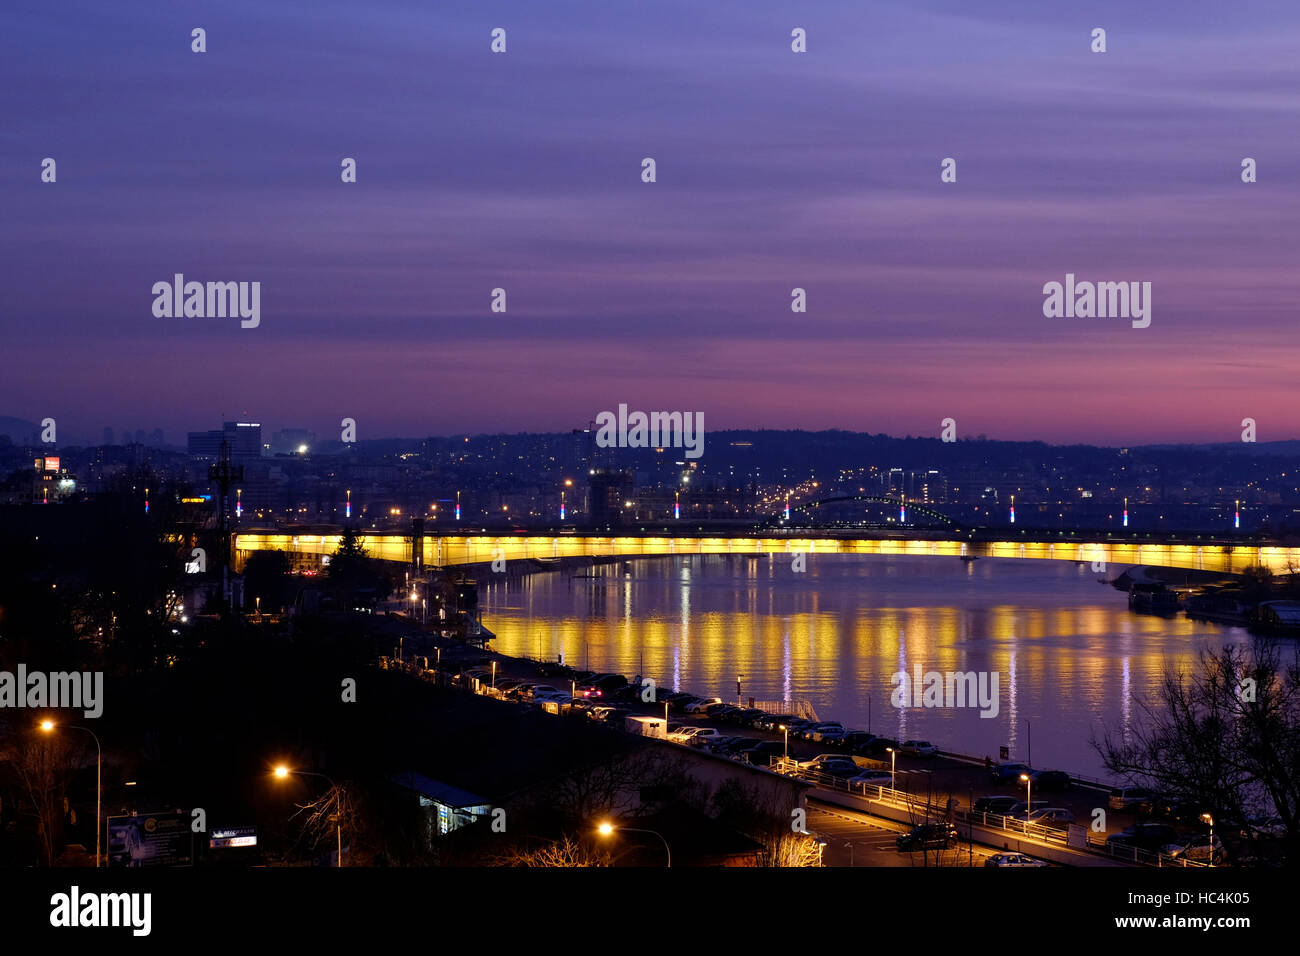 View at sunset of Branko's bridge or Brankov most connecting the city center with New Belgrade across Sava river in the city of Belgrade capital of the Republic of Serbia Stock Photo